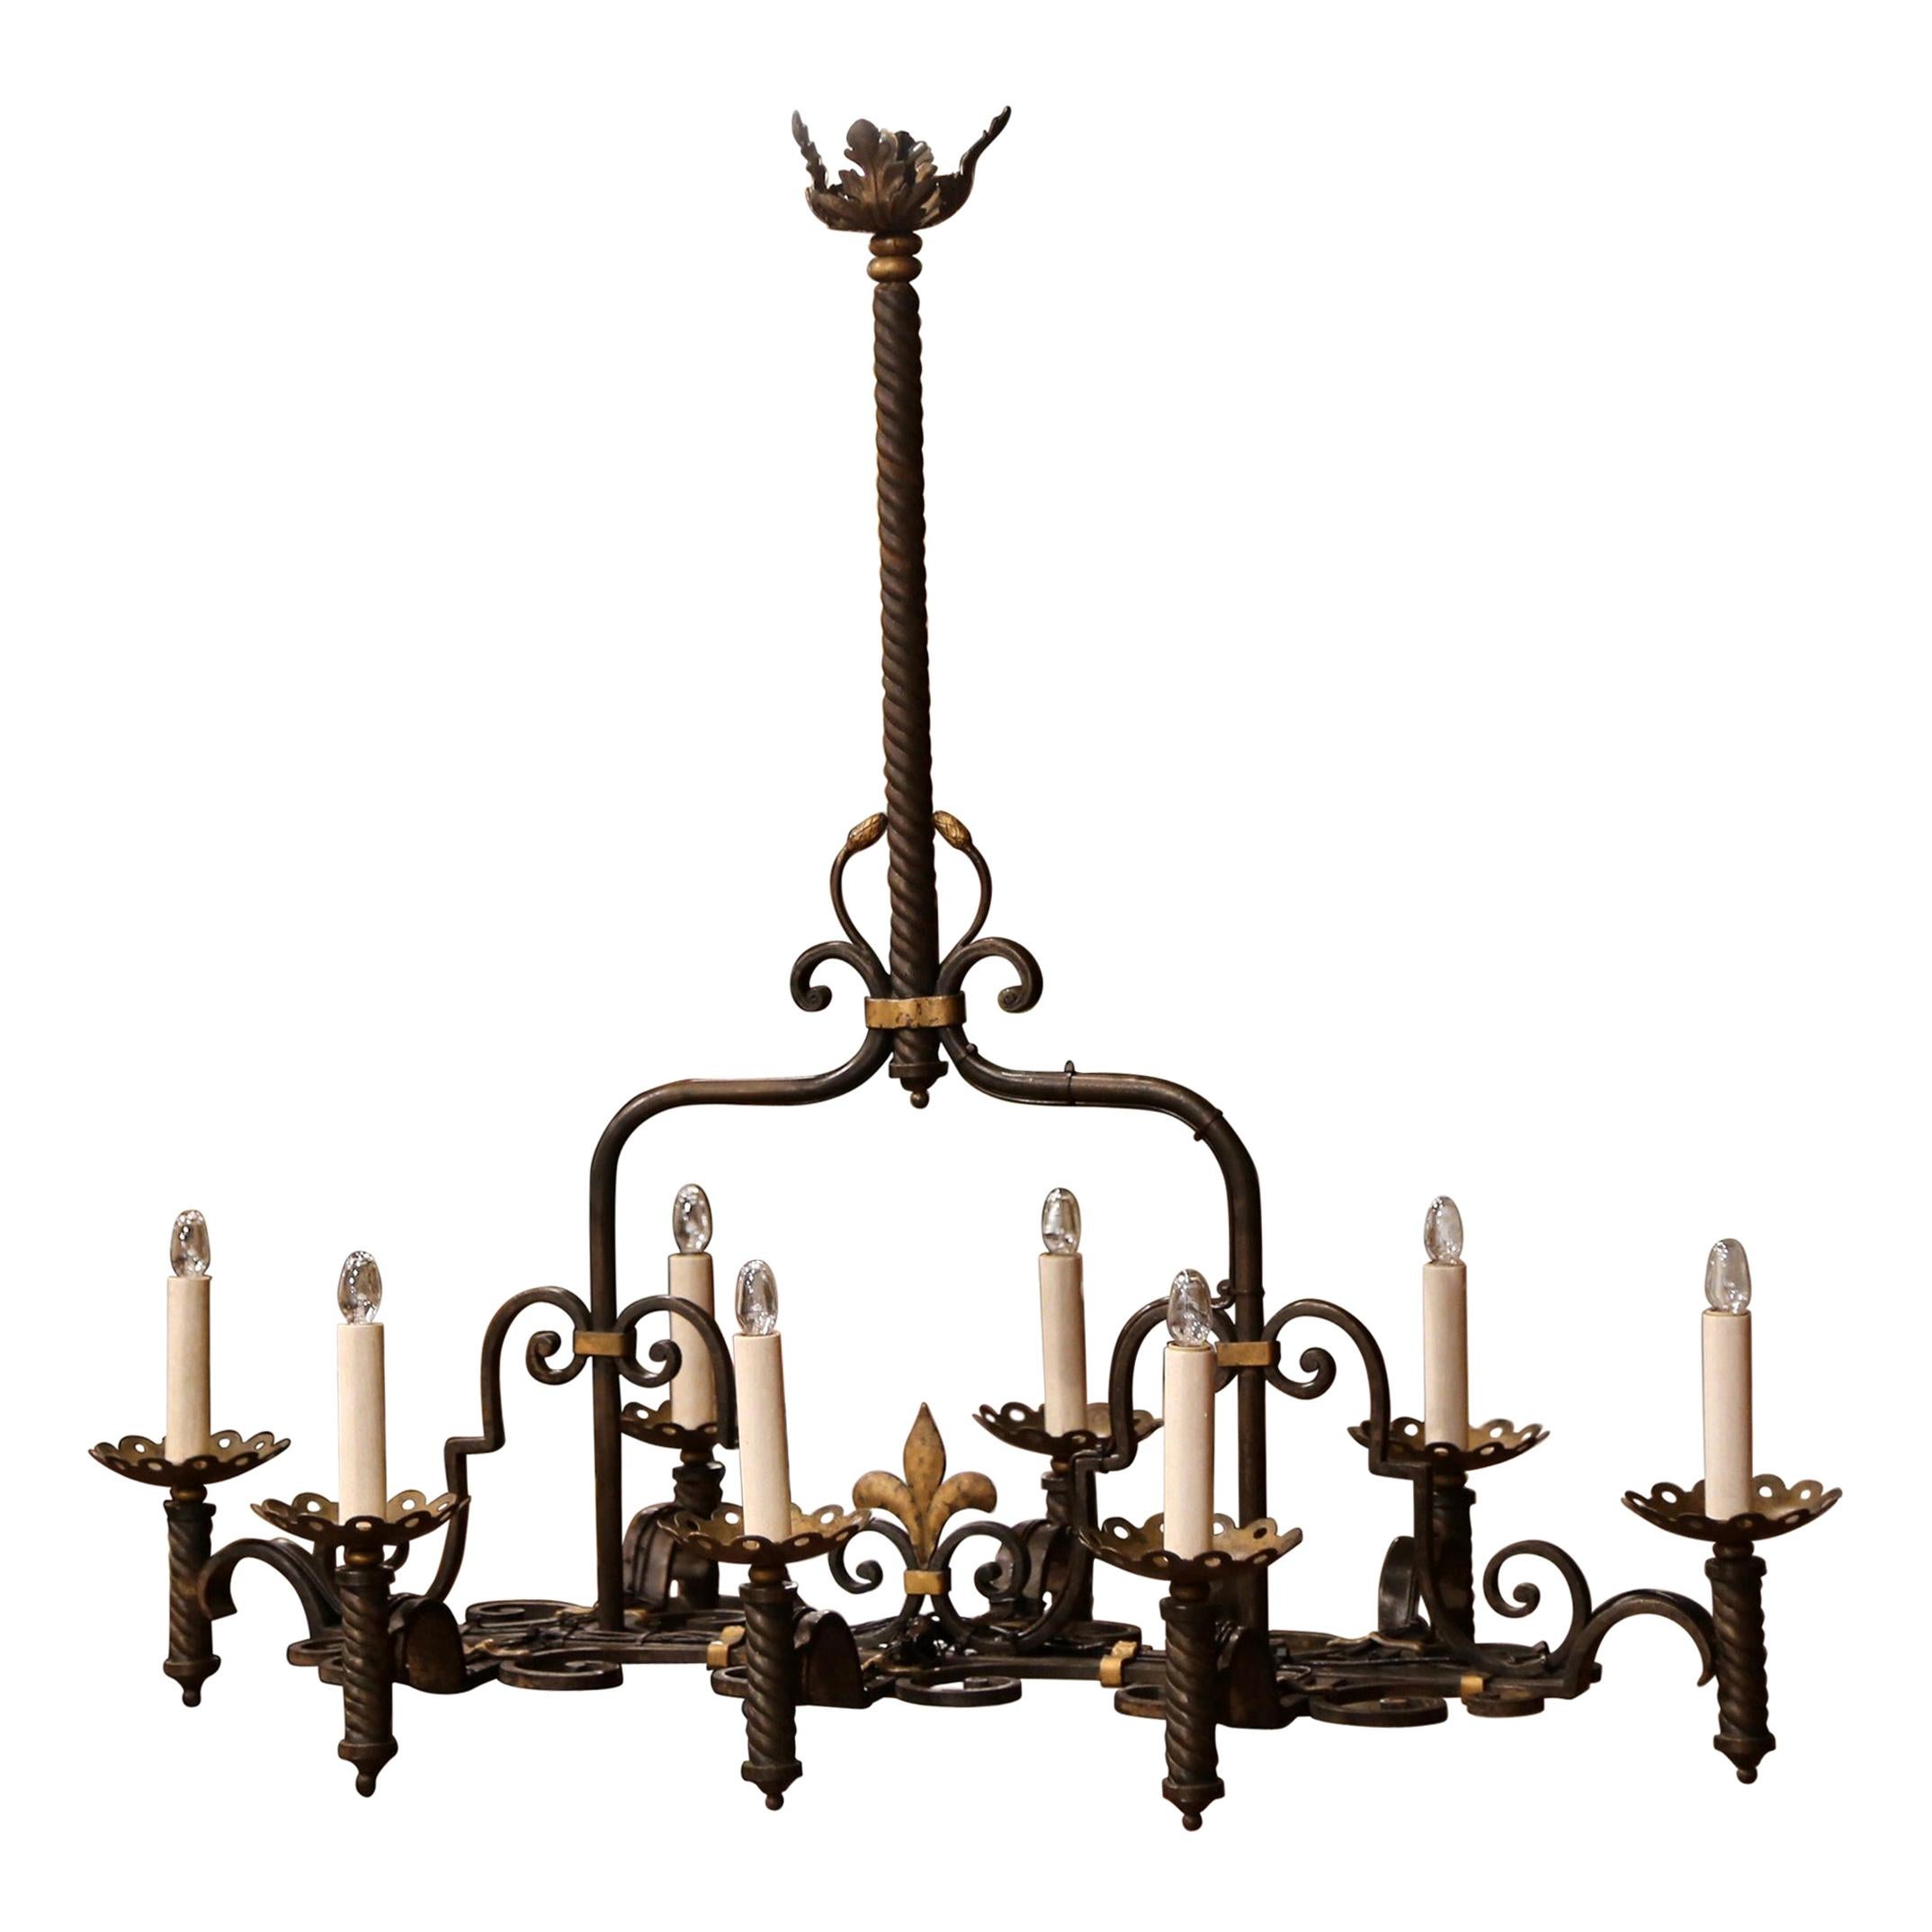 Late 19th Century French Gothic Eight-Light Iron Chandelier with Fleur de Lys